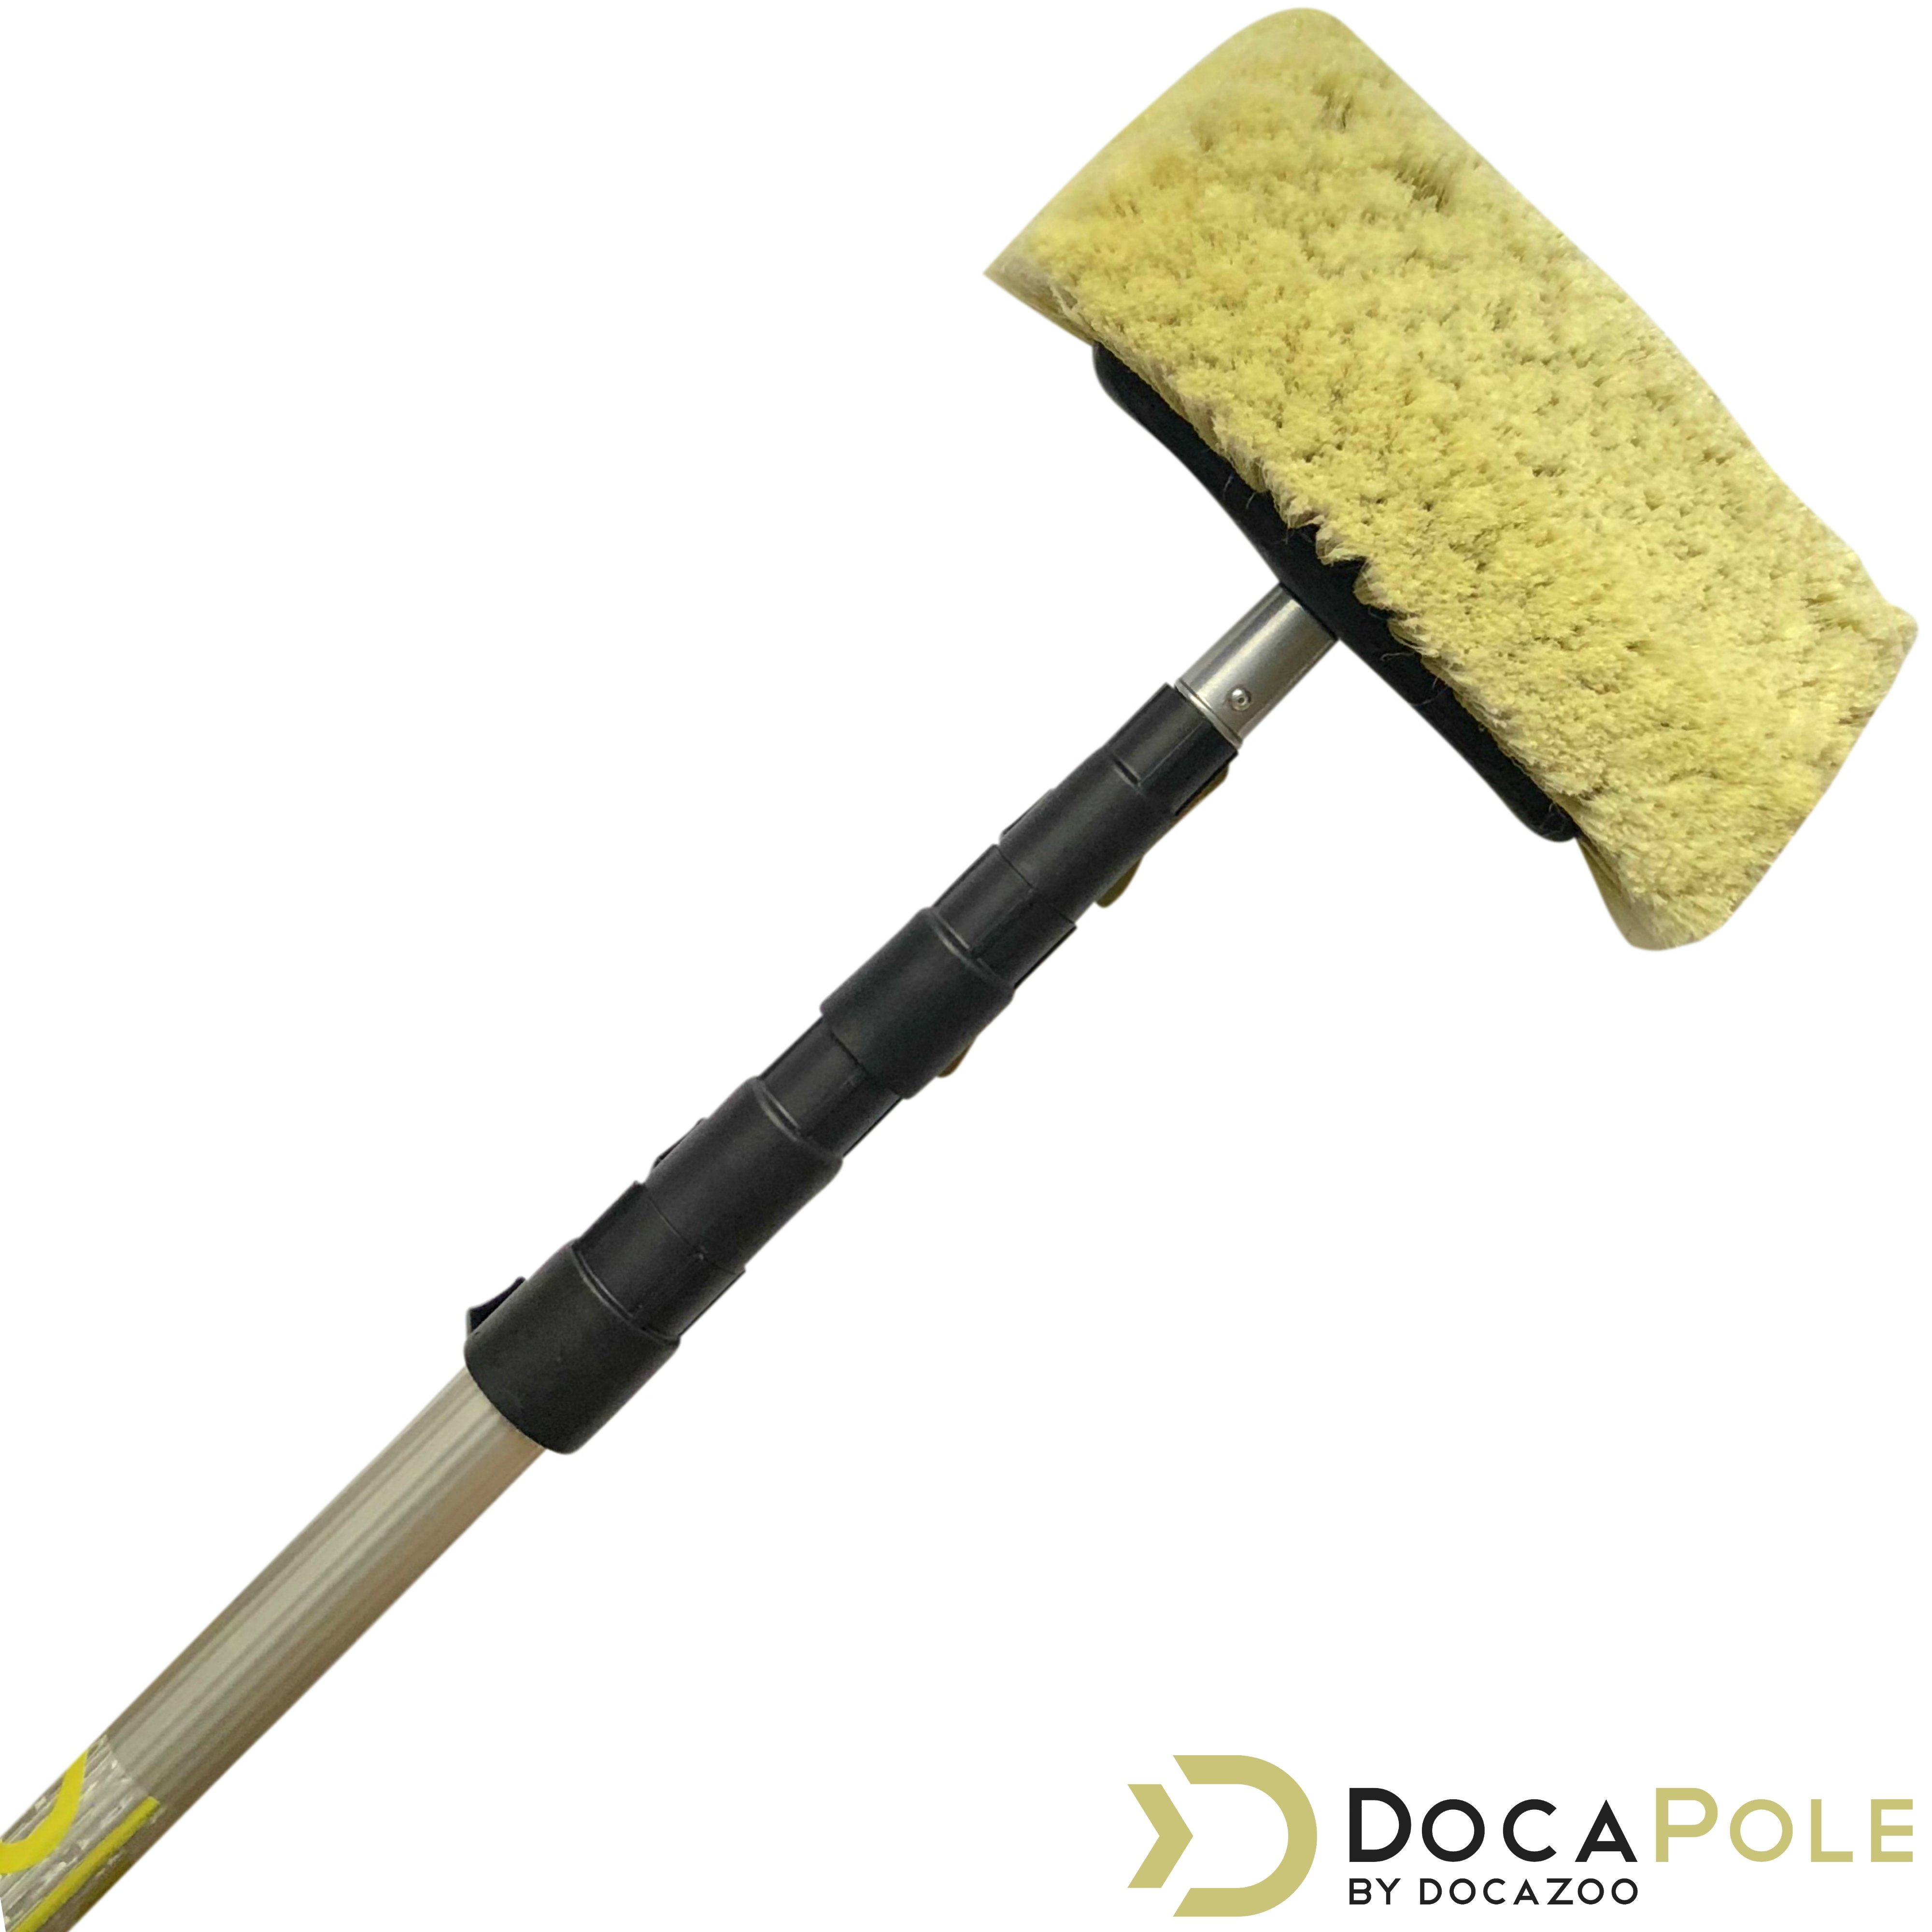 DocaPole 6-24' Soft Bristle Car Wash Brush & Extension Pole |11" Scrub Brush with 12 Foot Handle | Long-Reach Cleaning Brush and Deck Brush for Car, Truck, Boat, RV, House Siding, Floor, and More - image 1 of 7